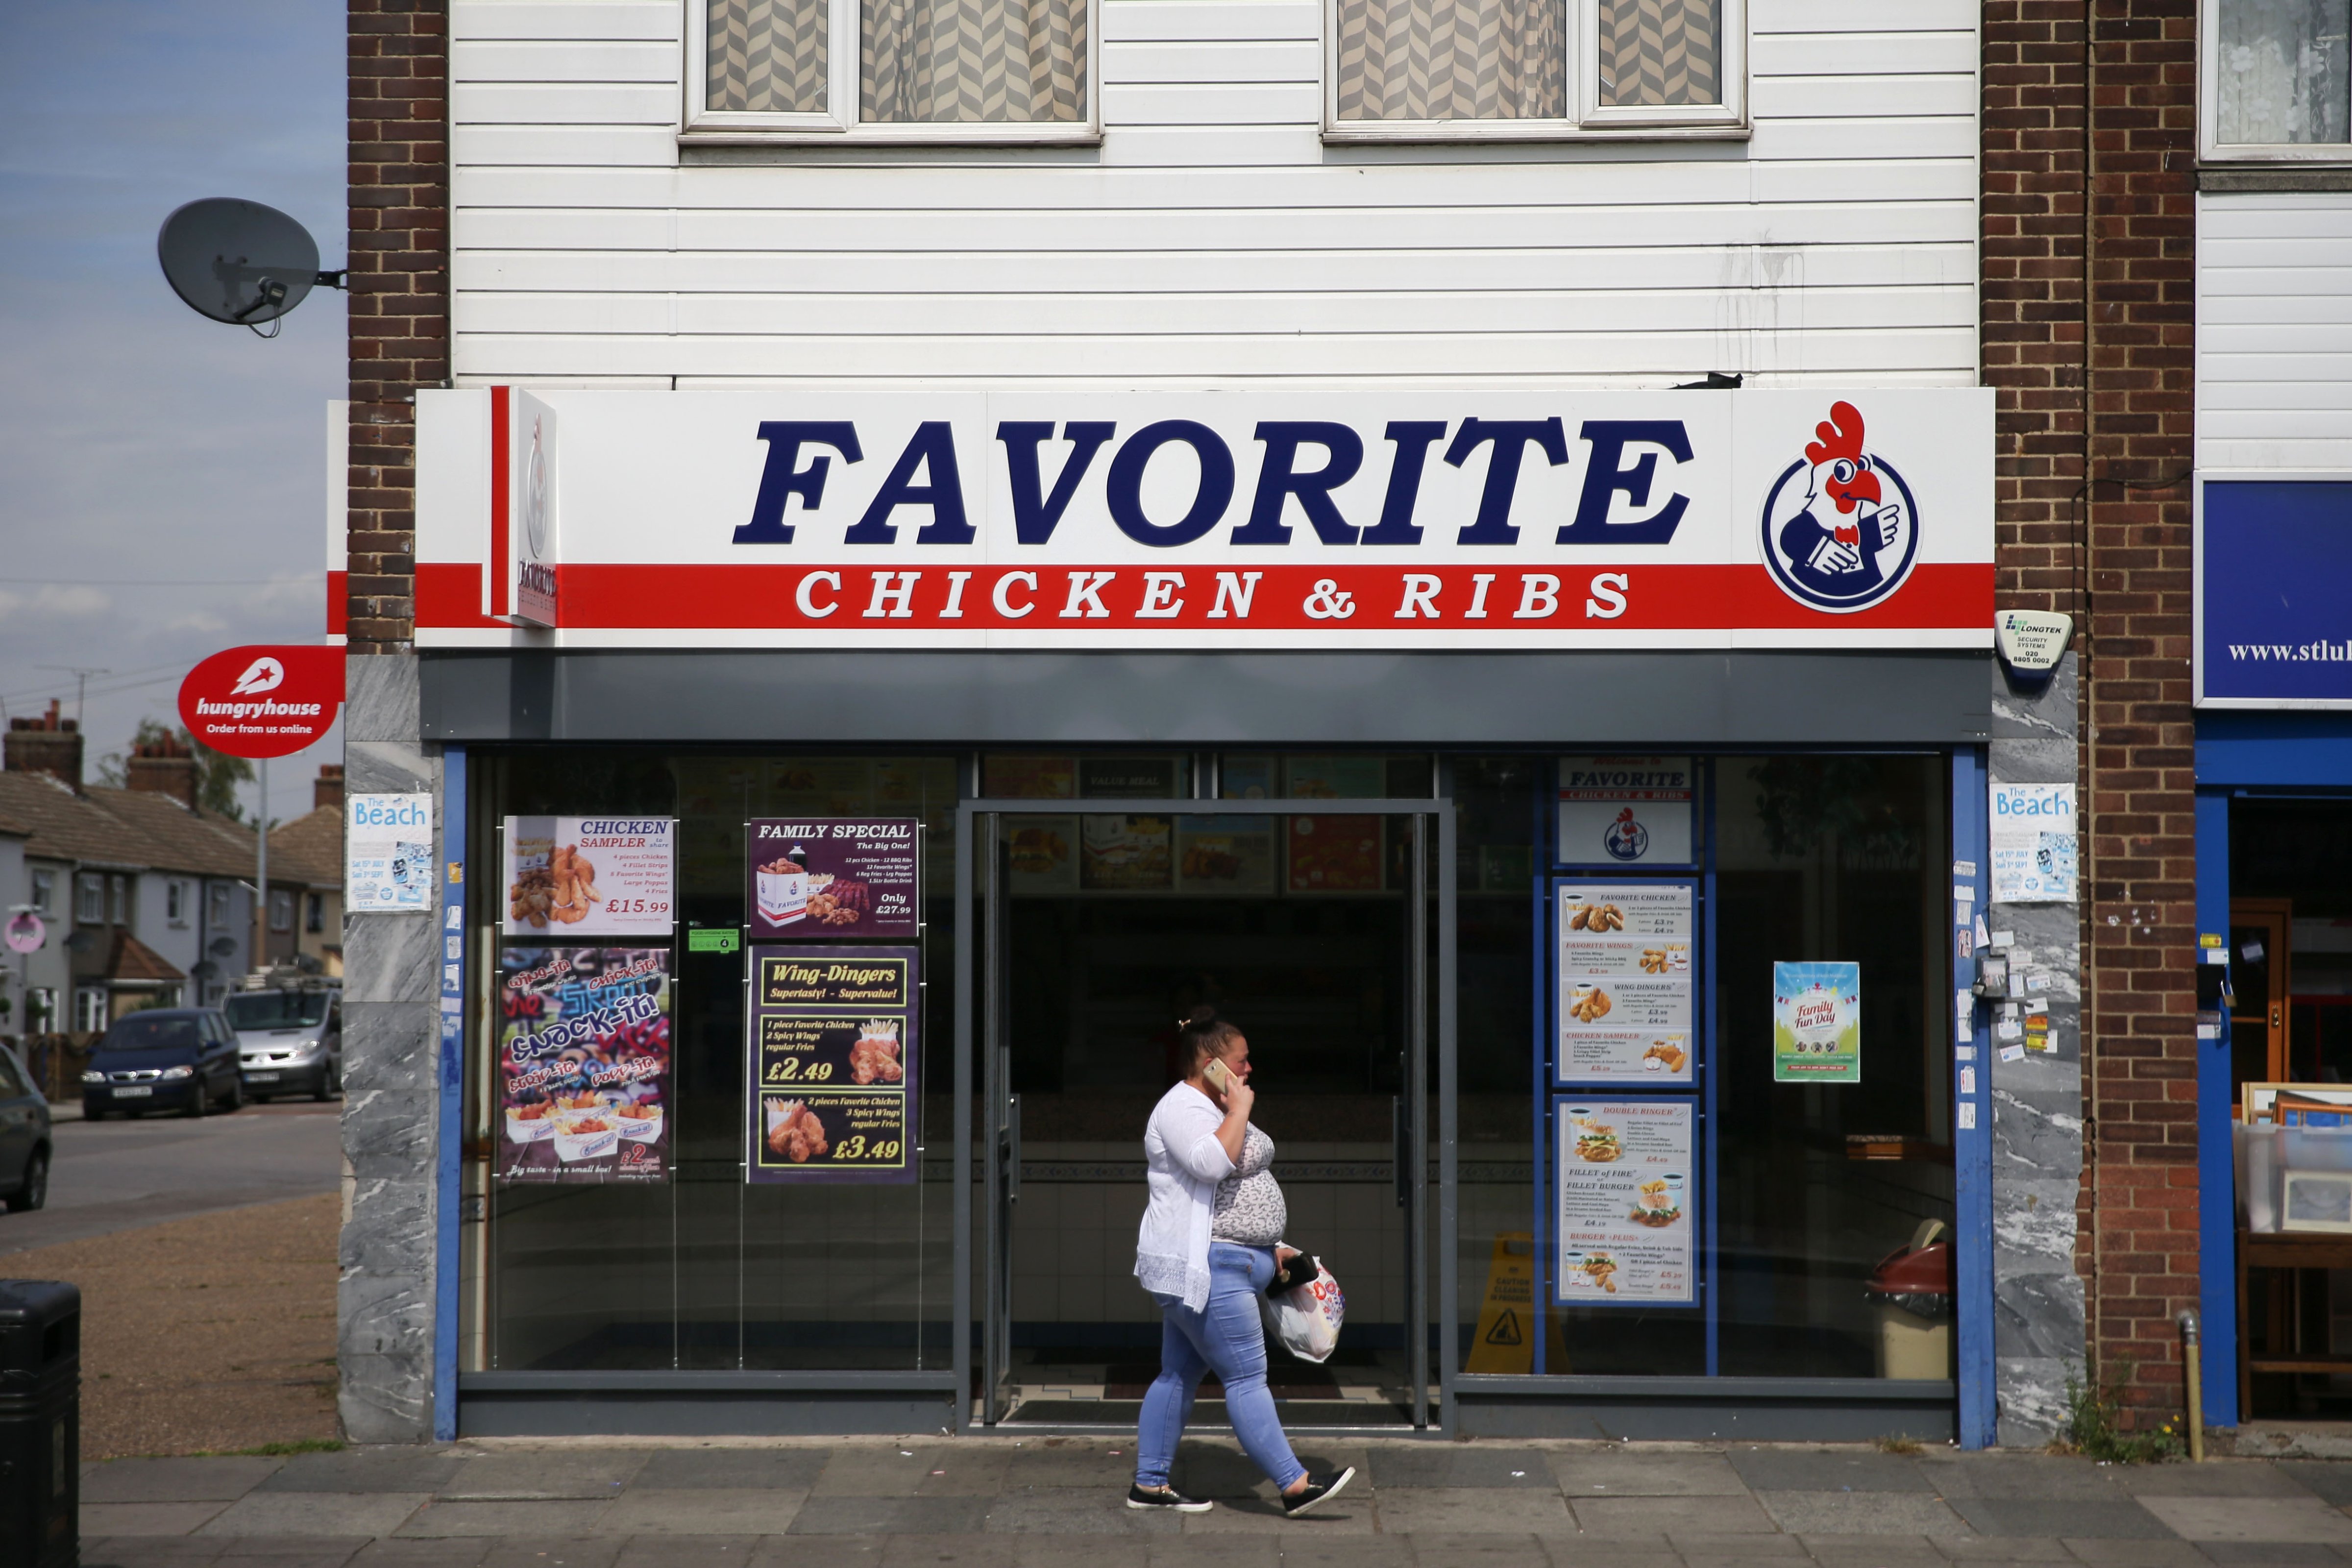 A resident walks past a fast food shop in the town of Tilbury in Essex, east of London on August 26, 2017. (DANIEL LEAL-OLIVAS—AFP/Getty Images)